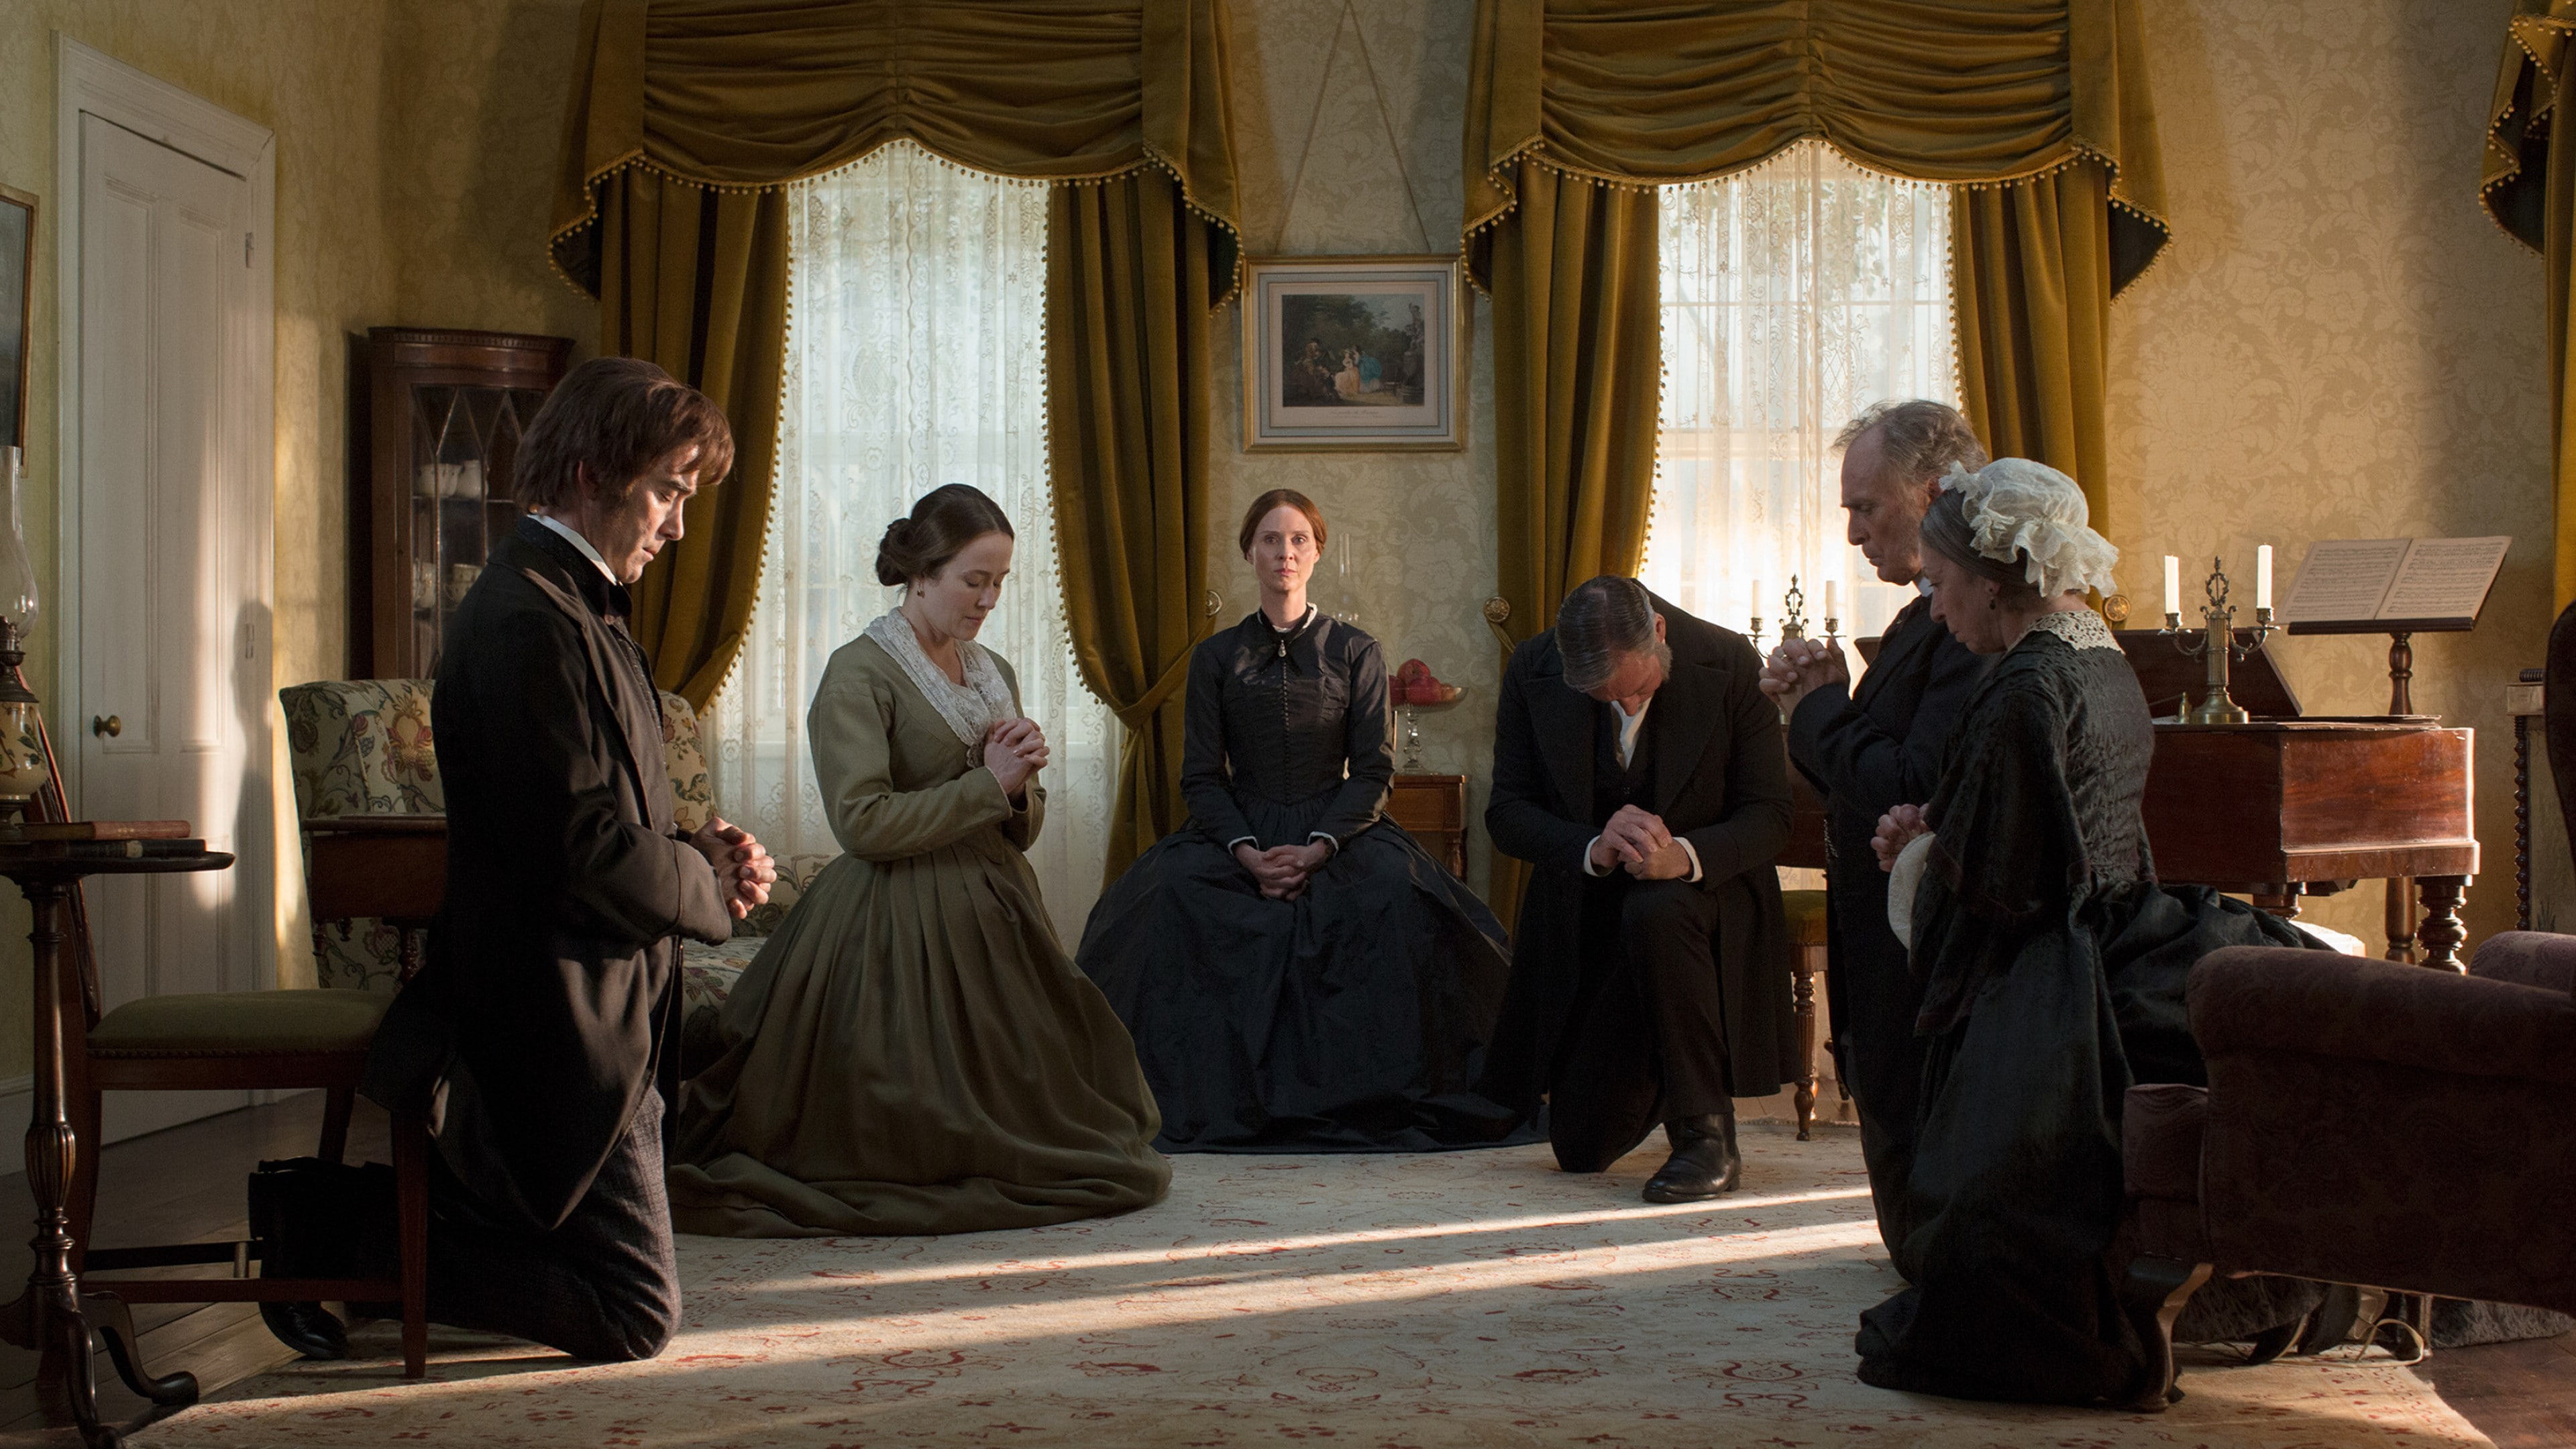 group of people kneeling praying inside room movie scene, A Quiet Passion